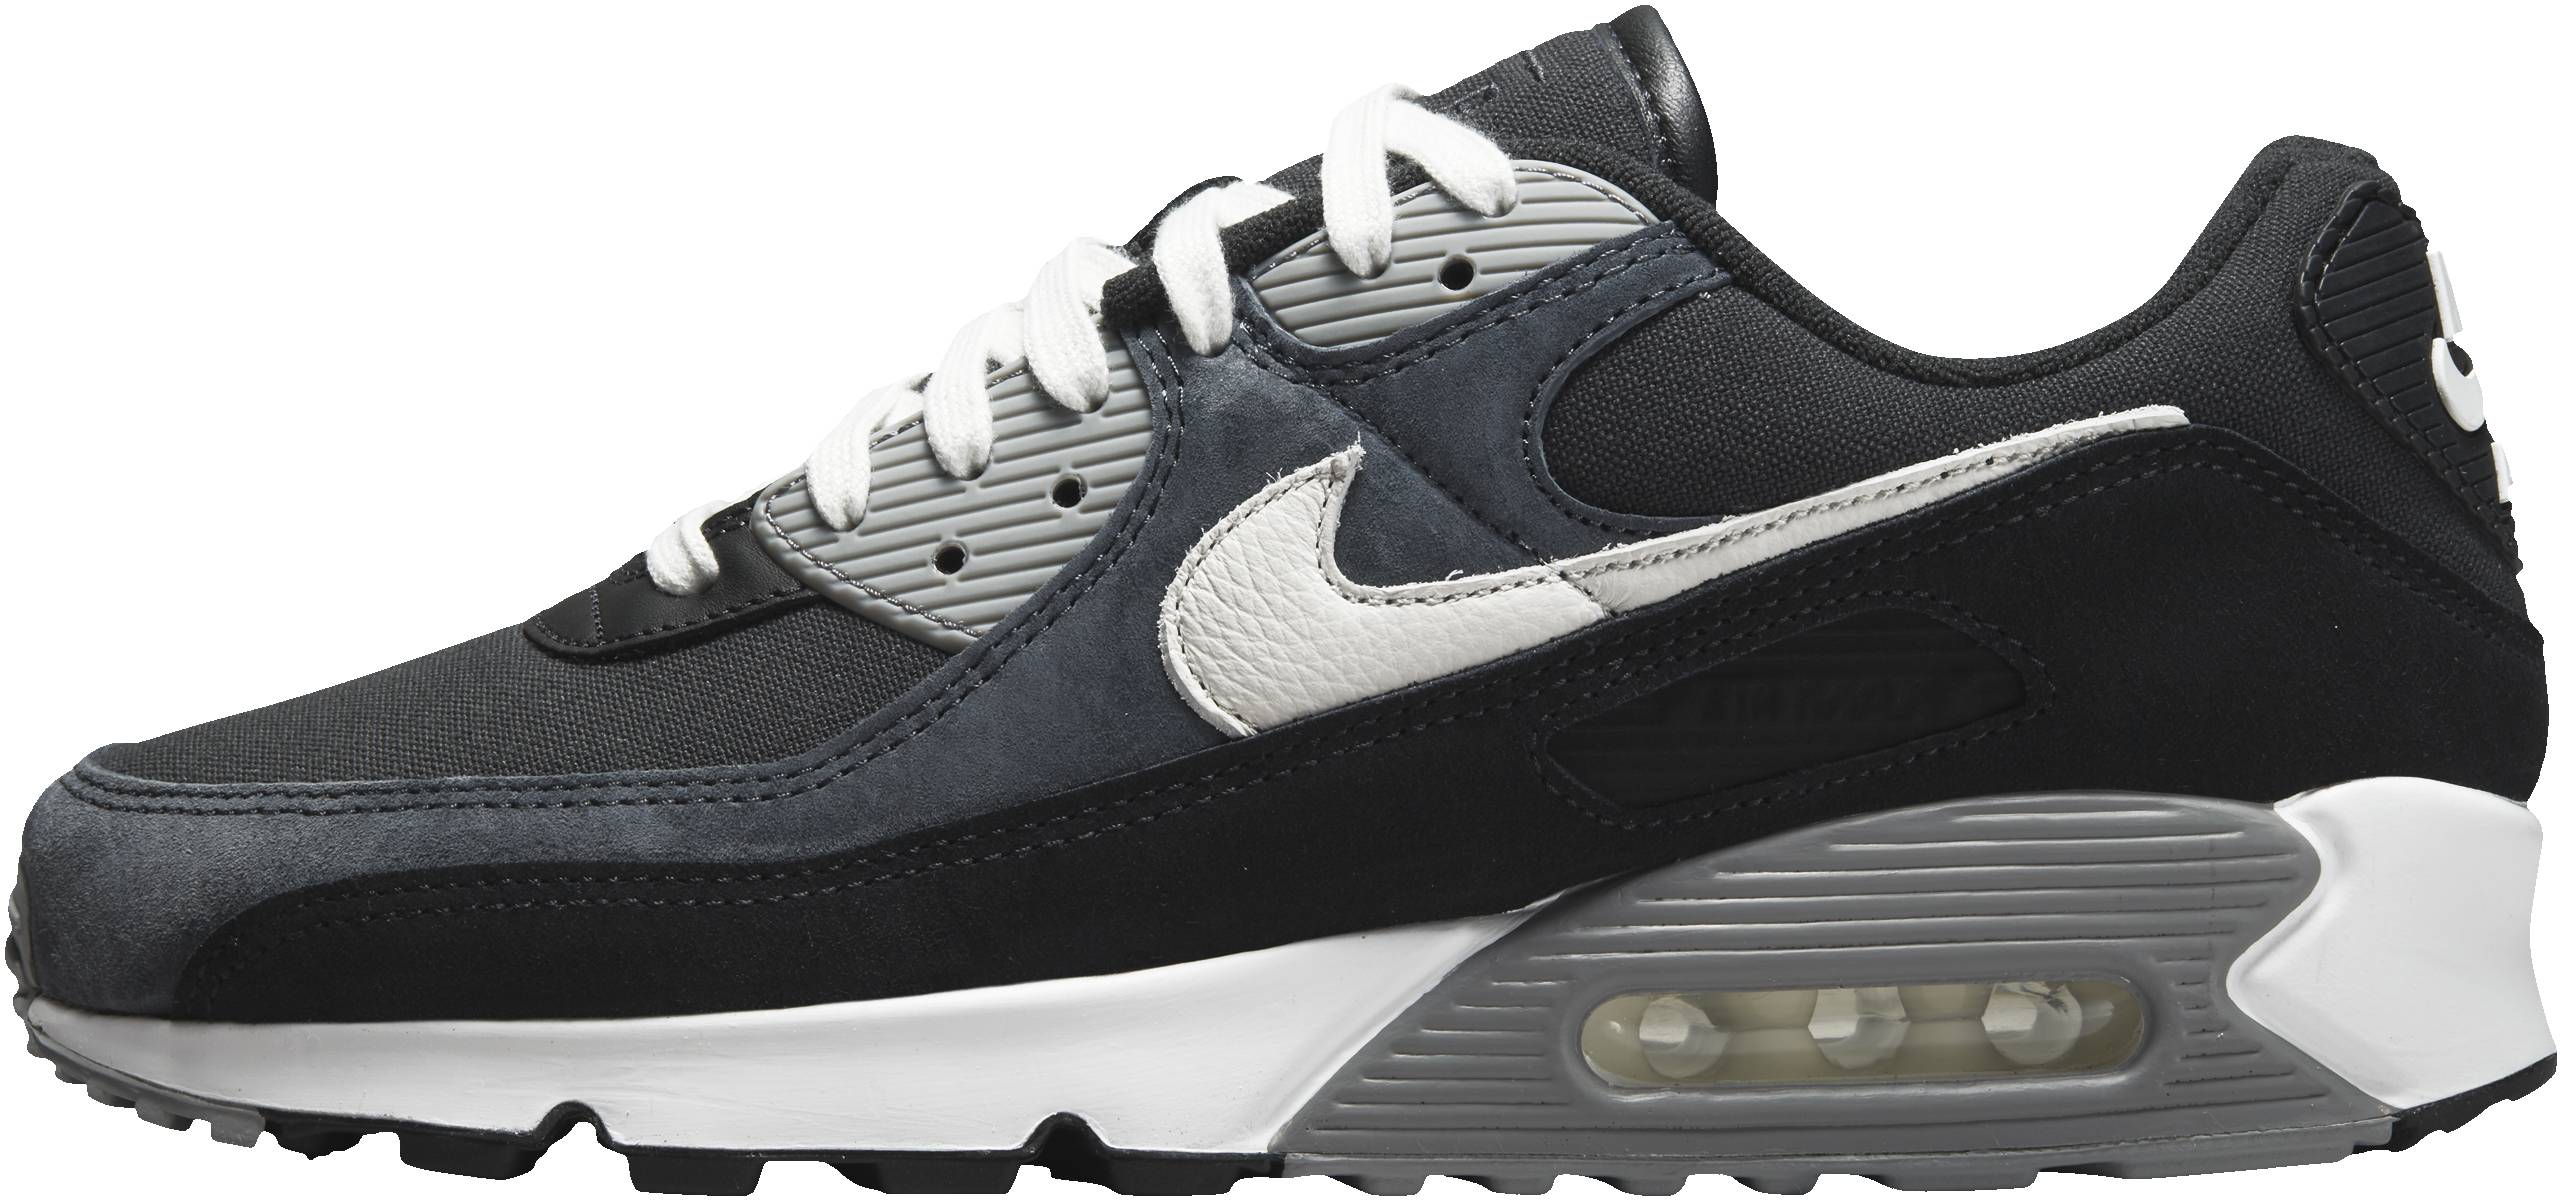 go shopping plans Go through Nike Air Max 90 Premium sneakers in 10+ colors (only $109) | RunRepeat